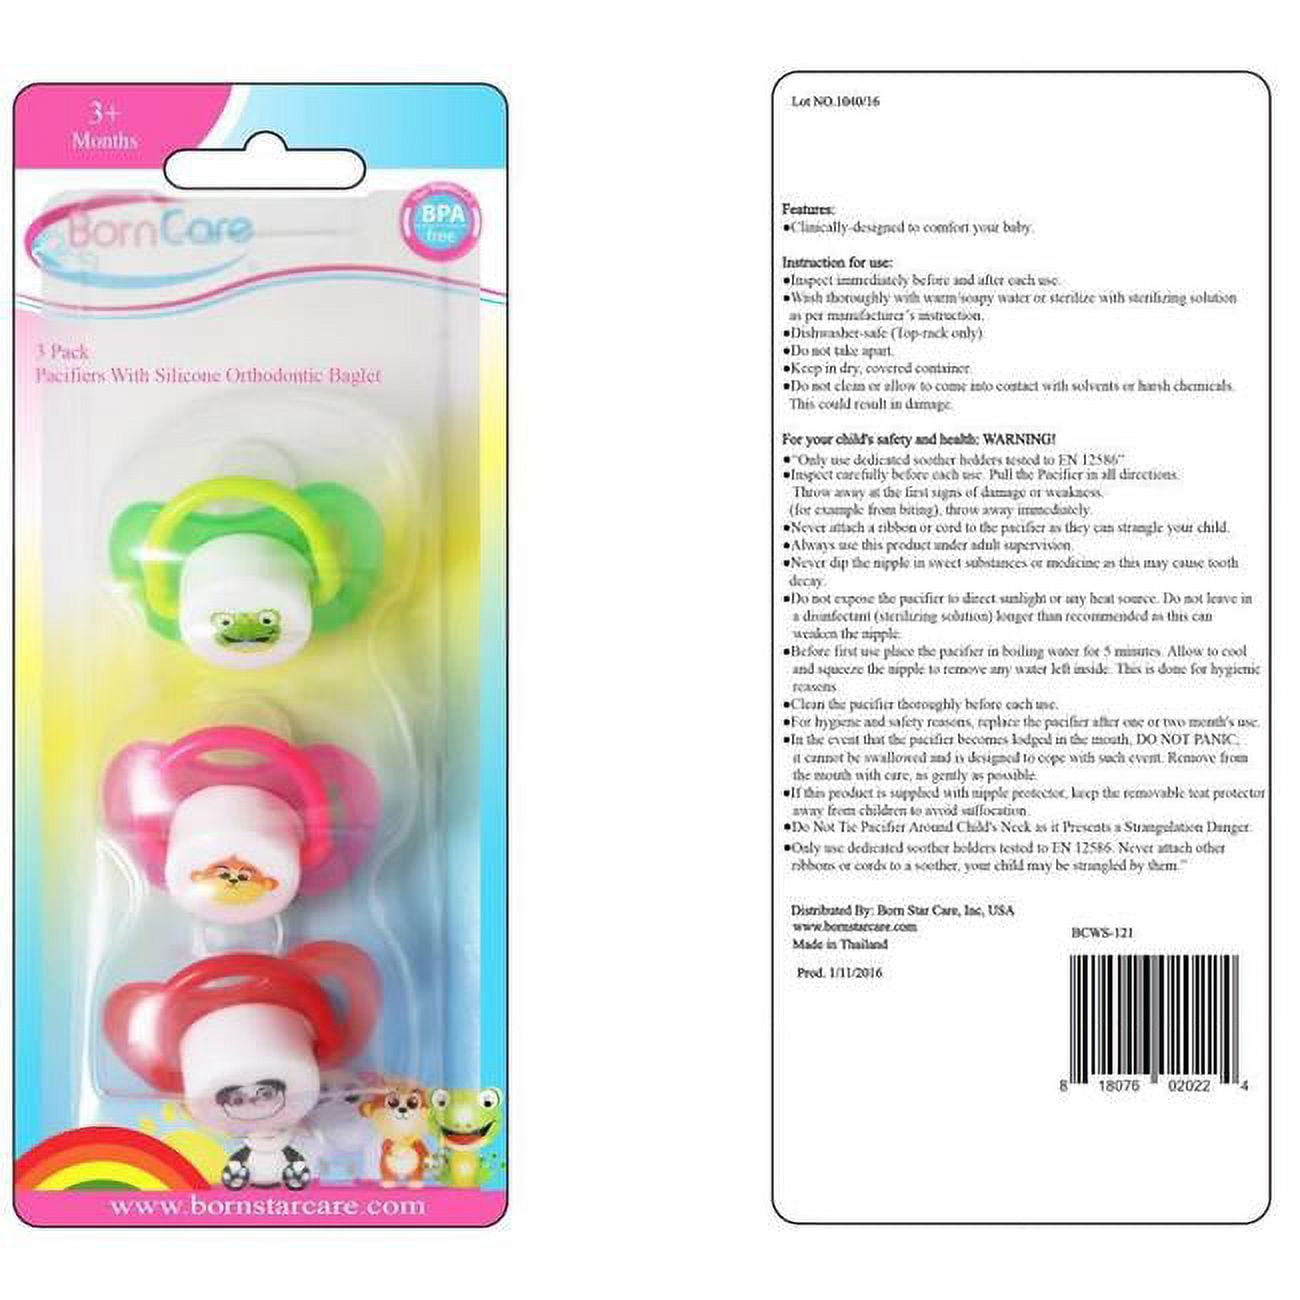 Bcws-121 3 Months Plus, Pacifiers Printed With Silicone Orthodontic Baglet - 3 Pack